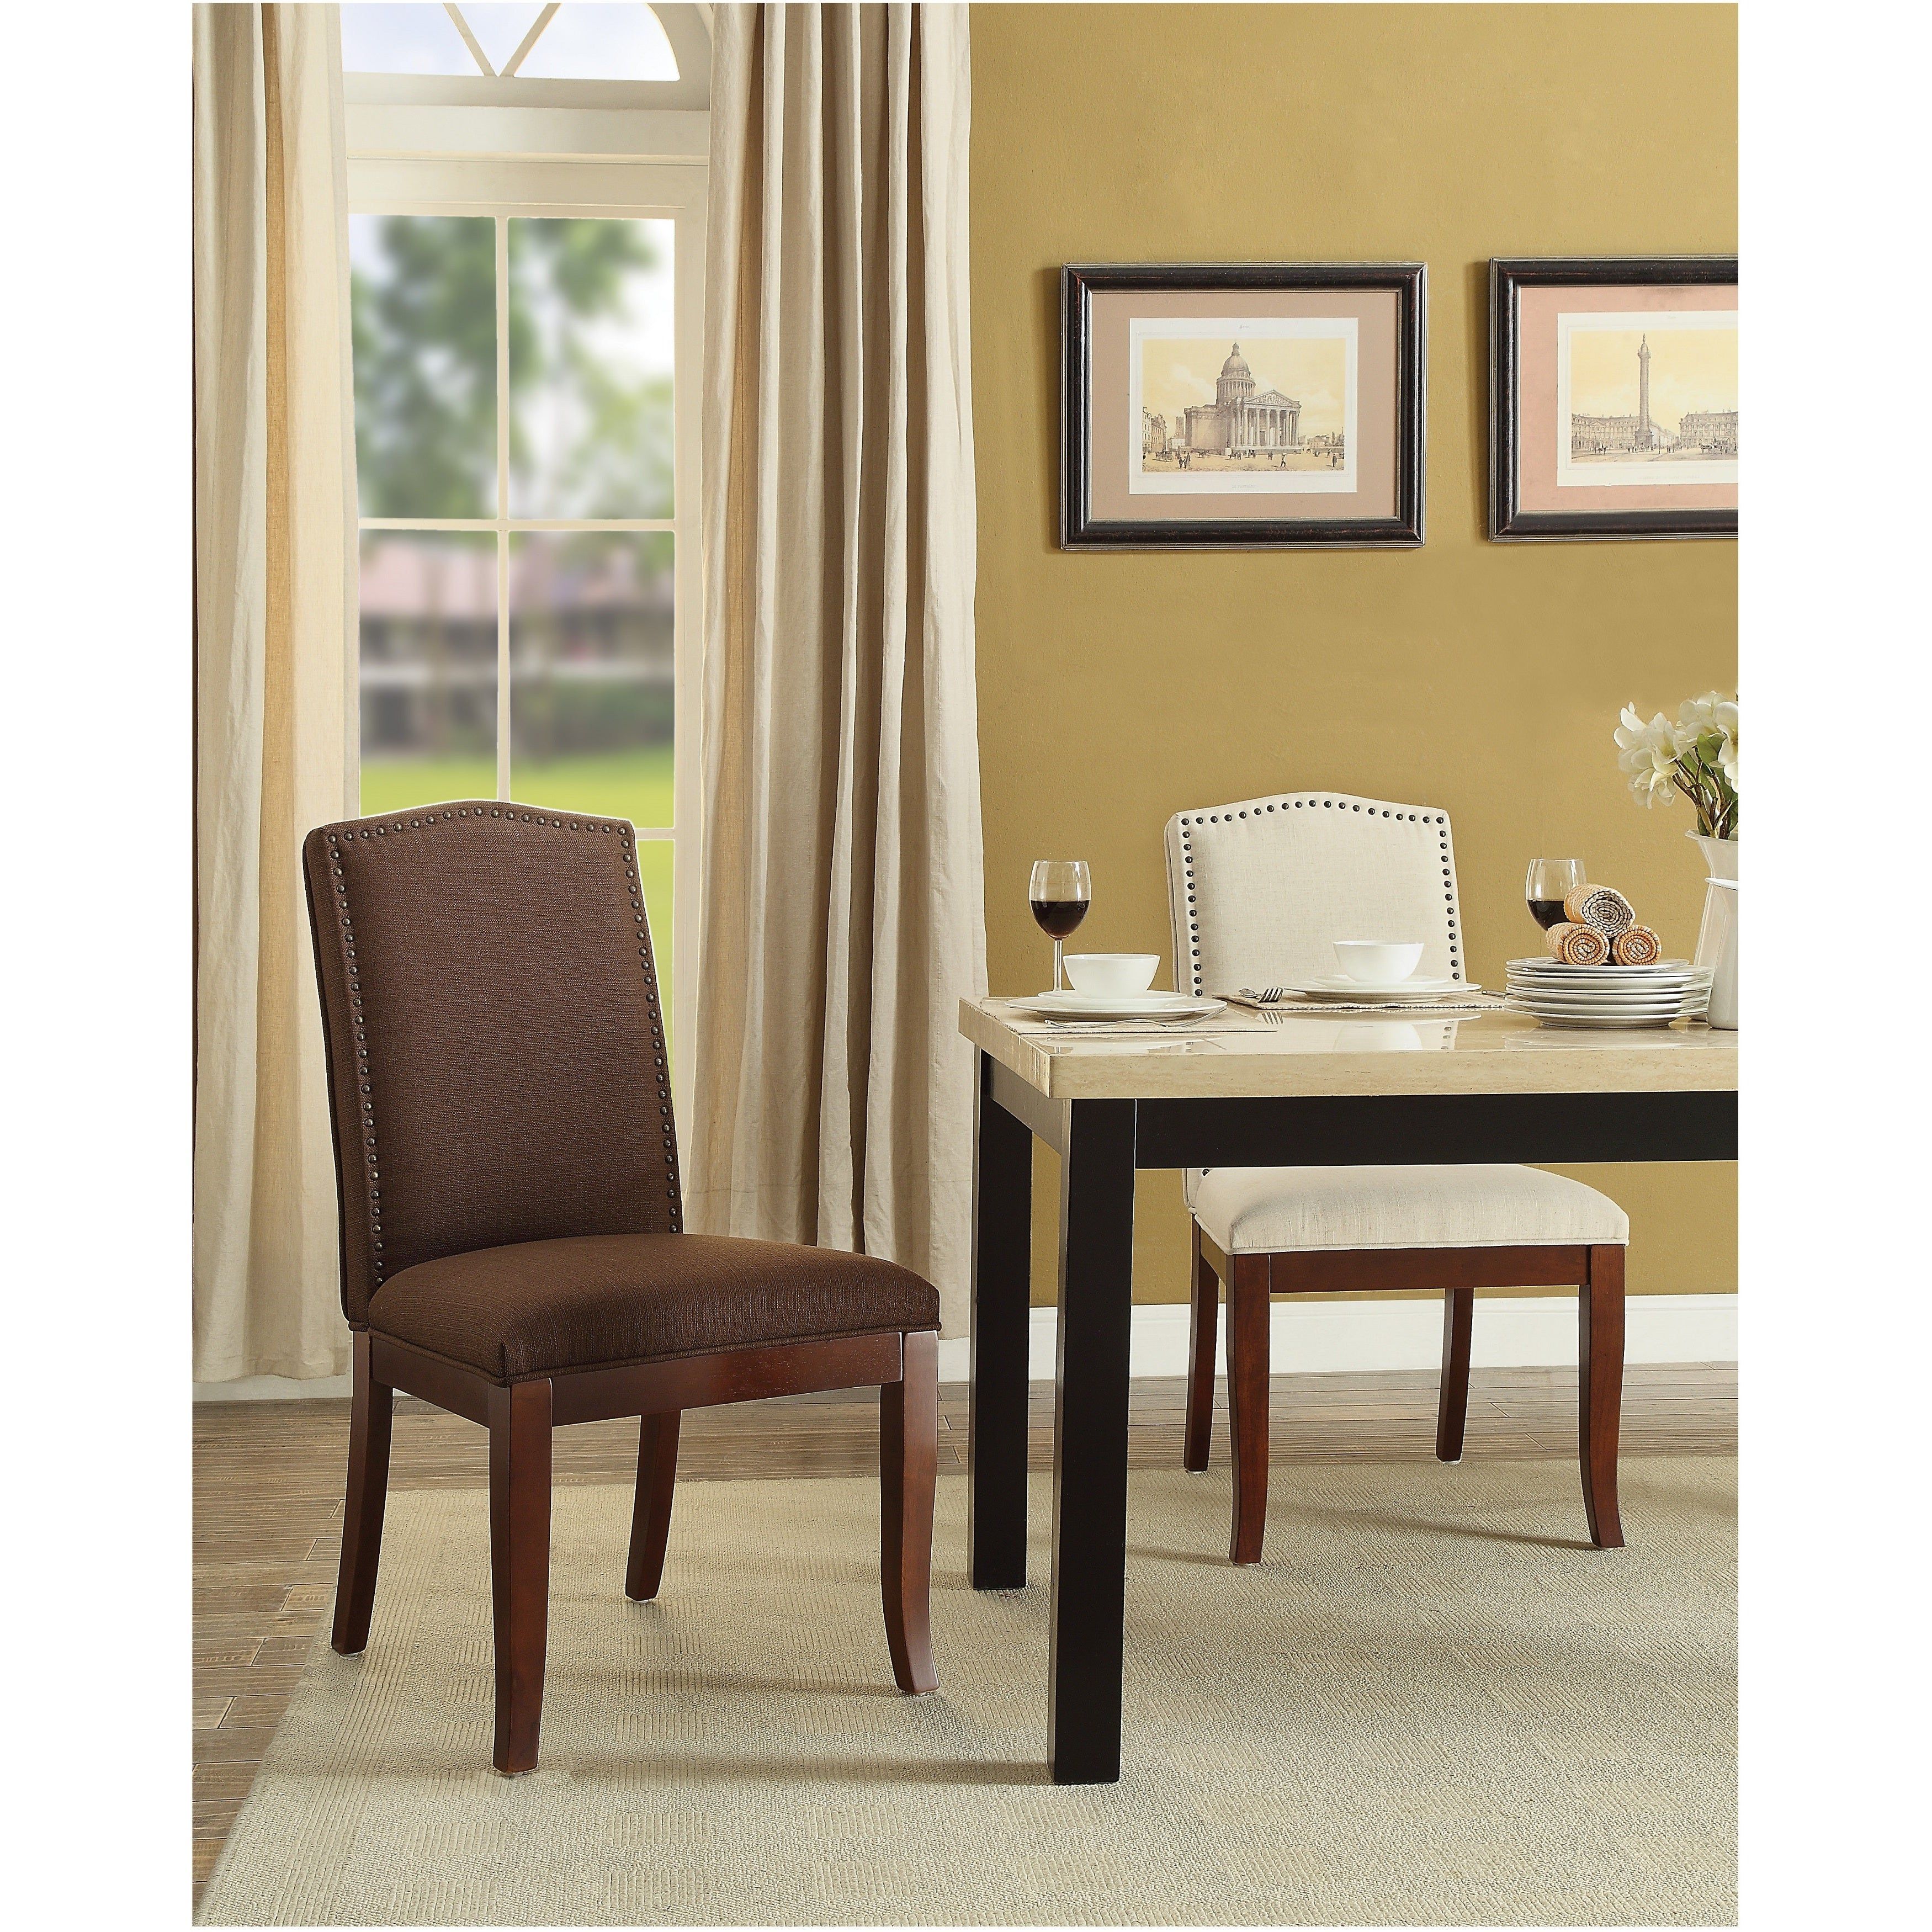 Osp Home Furnishings Hanson Dining Chair Within Festival Eclipse Credenzas (View 17 of 30)